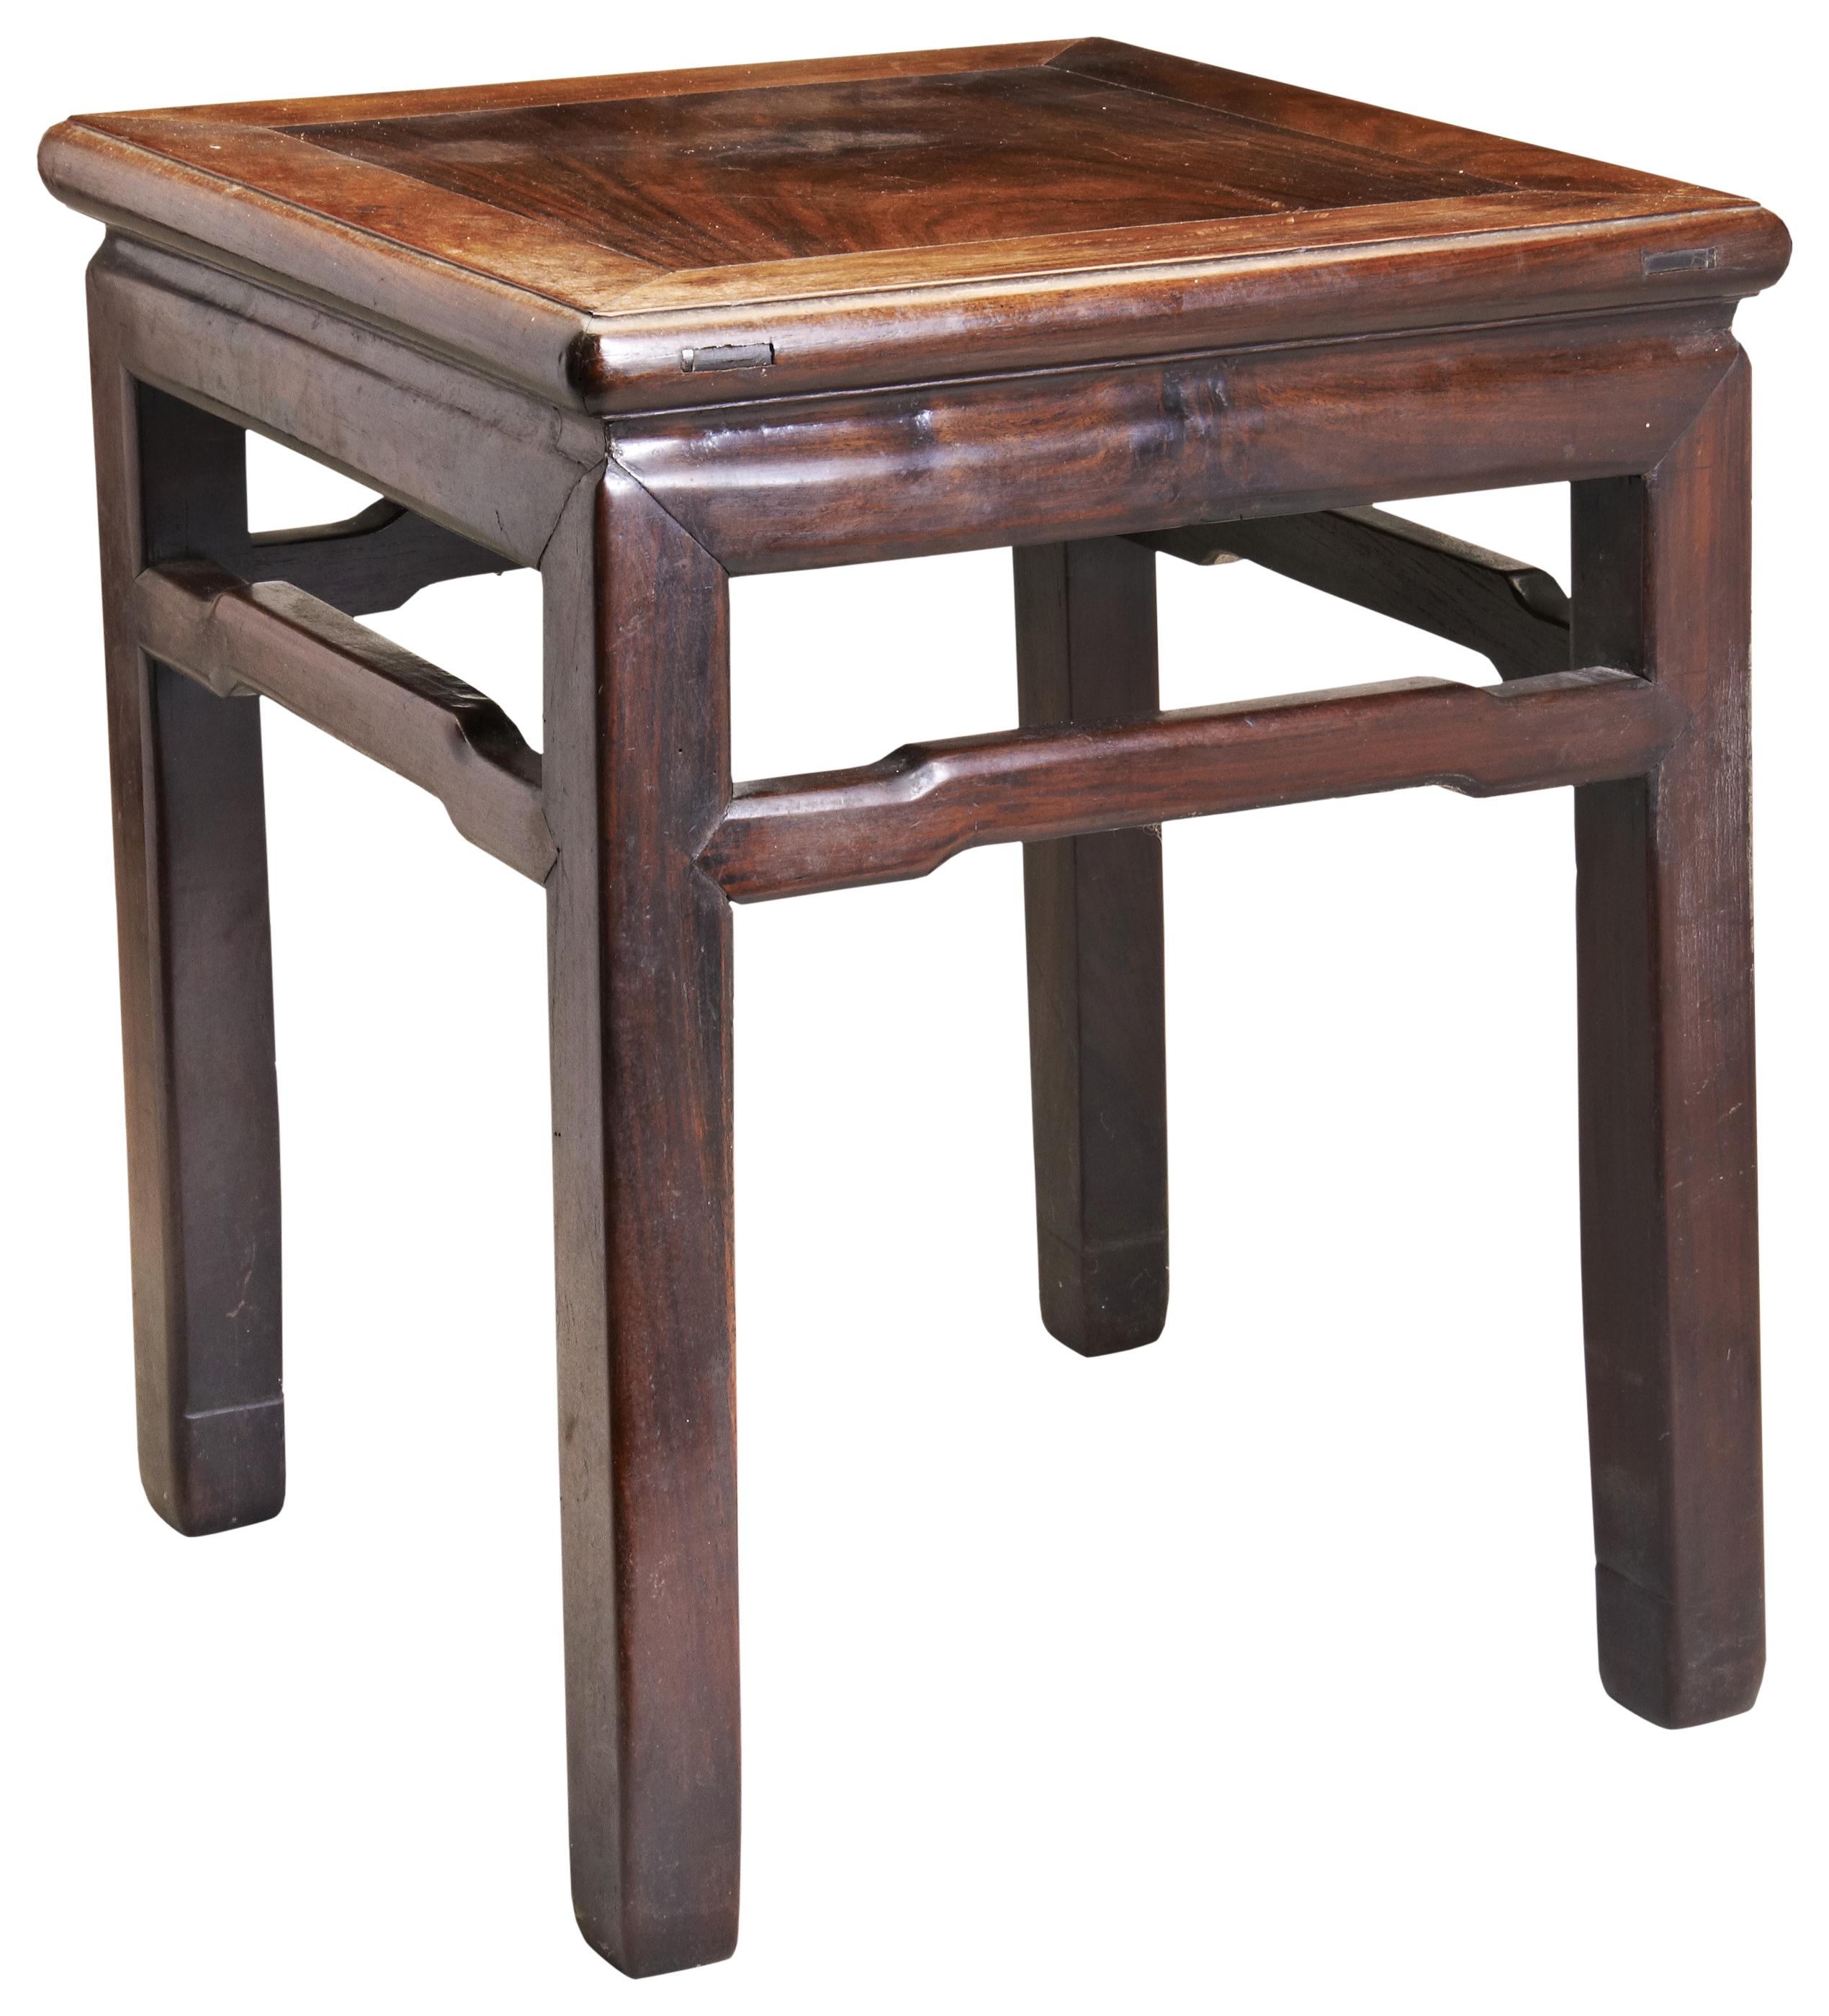 A CHINESE HARDWOOD STOOL QING DYNASTY (1644-1912) with natural wooden grain.